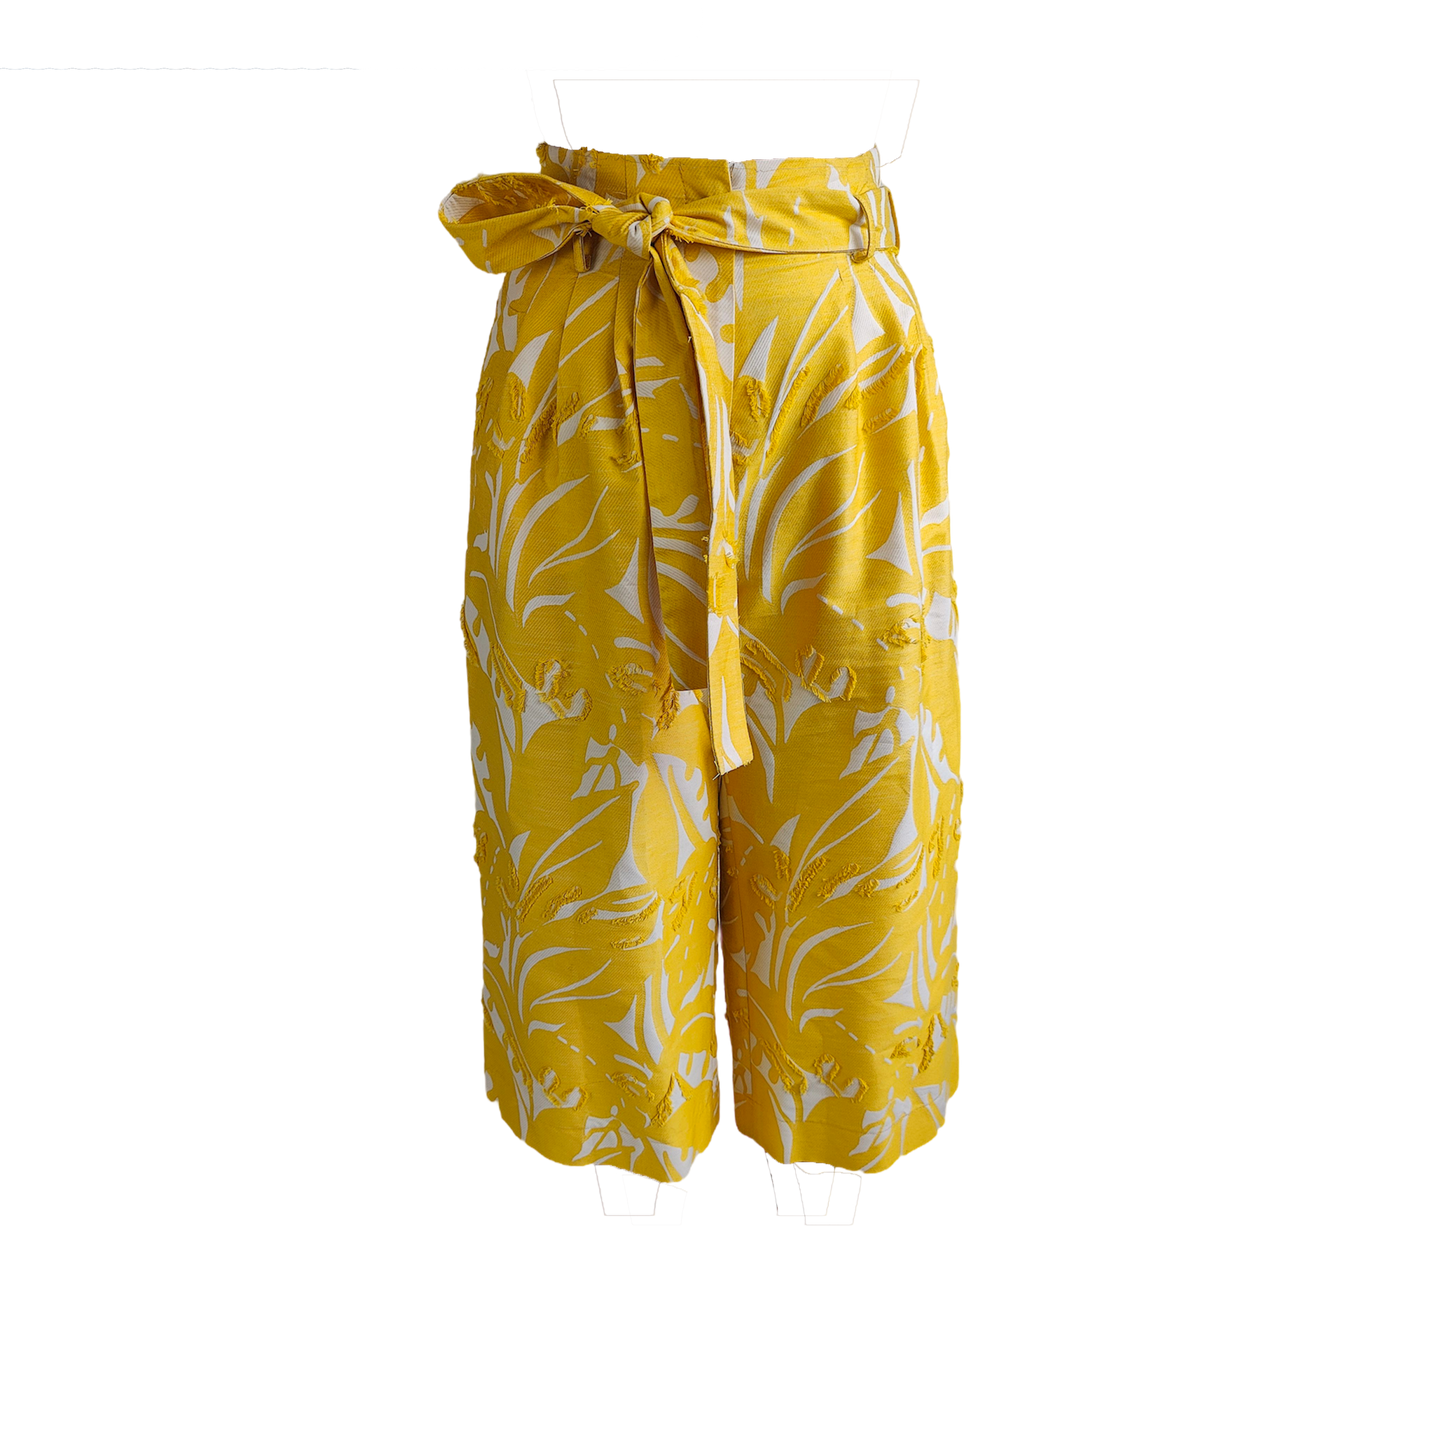 Reversible yellow cropped wide leg gaucho style pant with white patterns